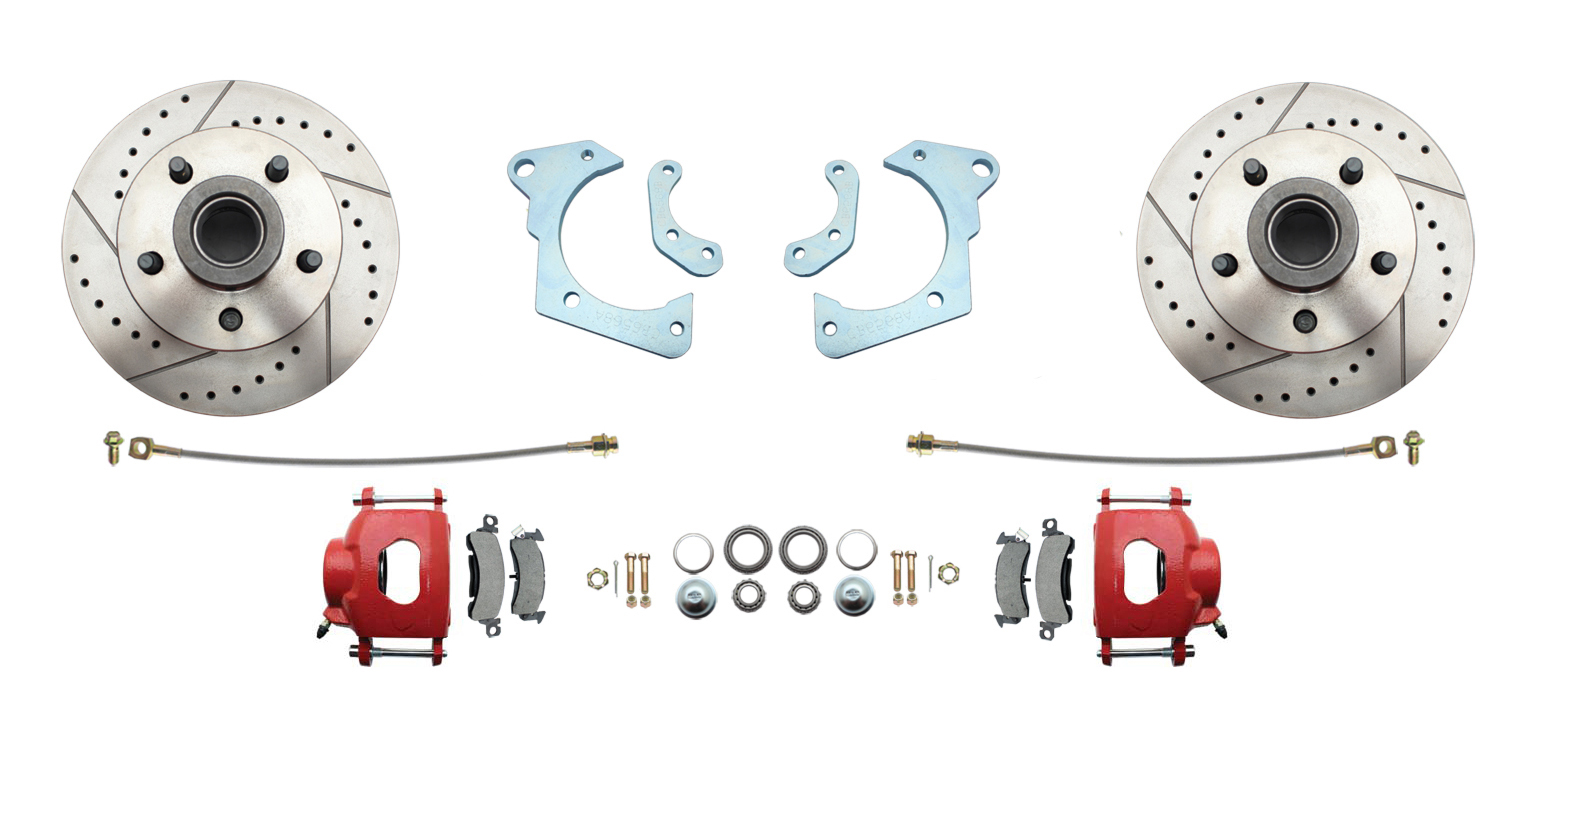 1965-1968 Full Size Chevy Complete Disc Brake Conversion Kit W/ Powder Coated Red Calipers & Drilled/ Slotted Rotors